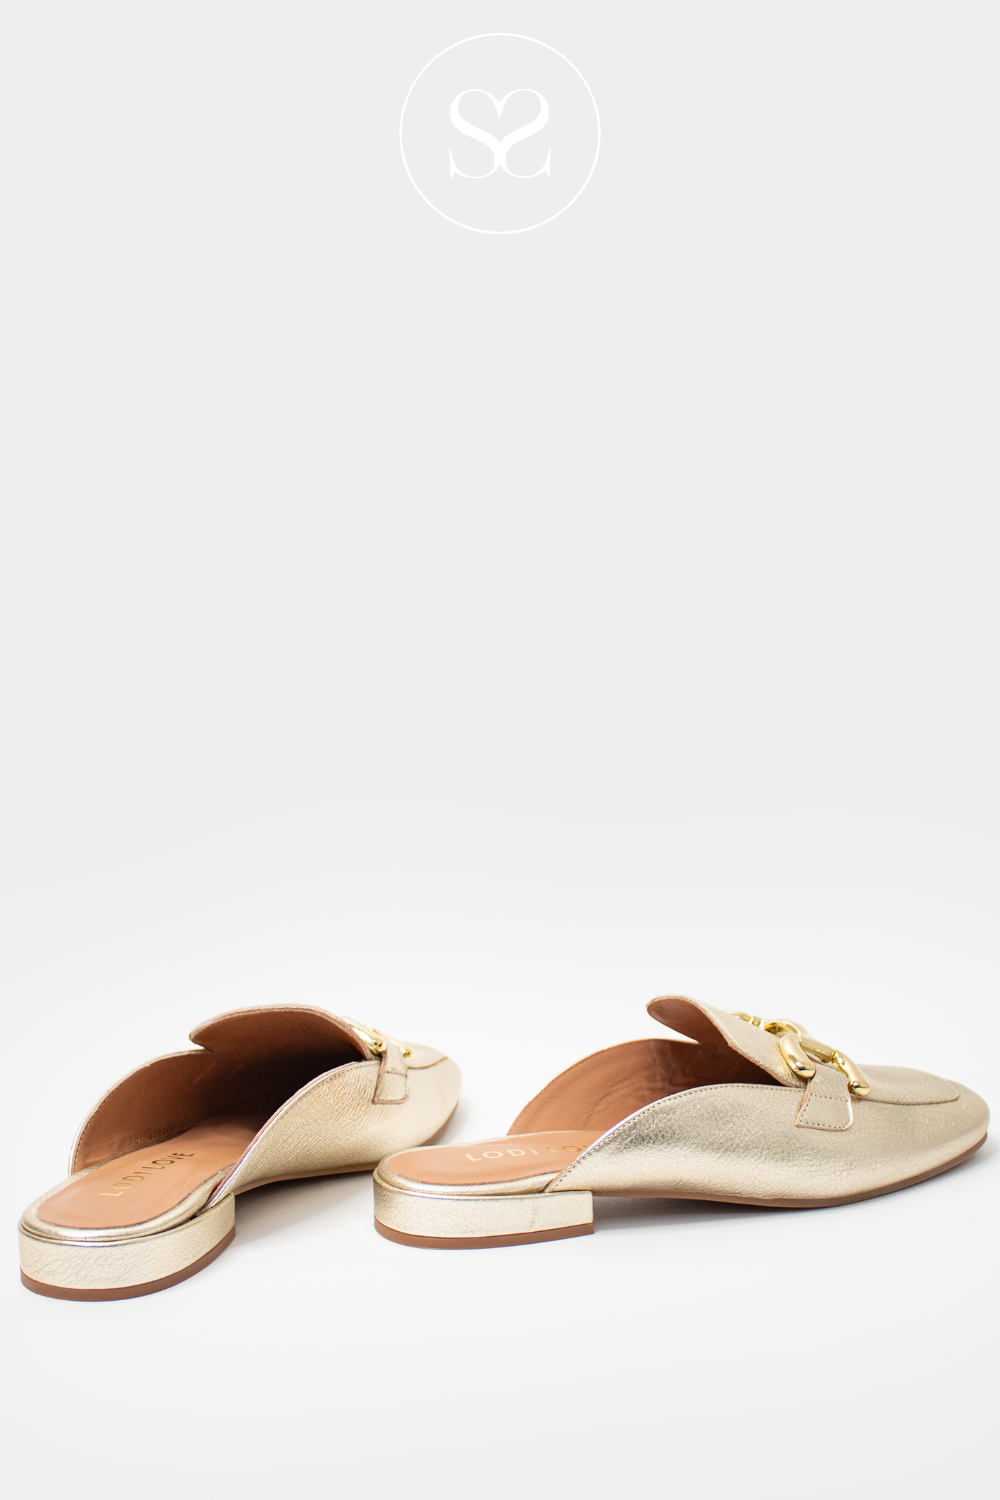 gold leather flat slider shoes from lodi